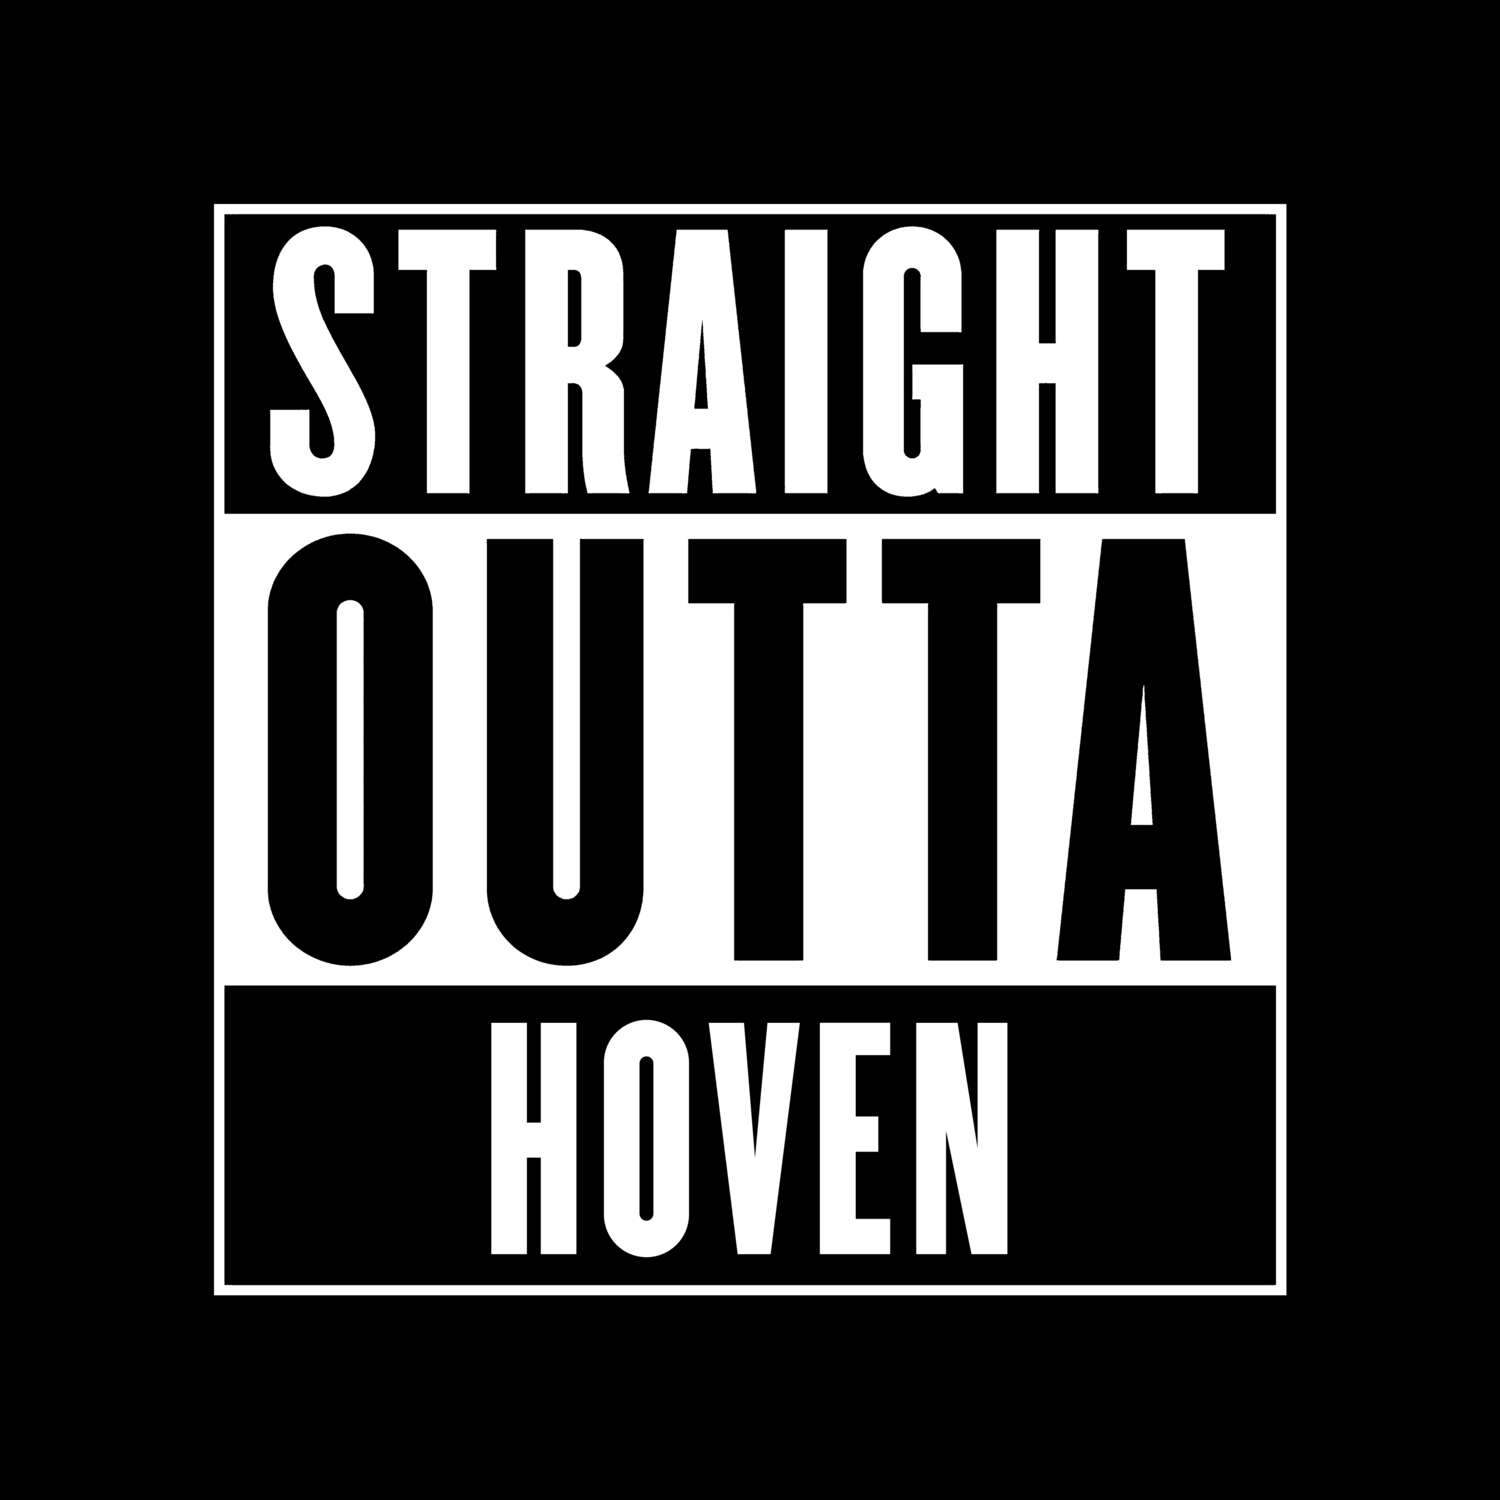 Hoven T-Shirt »Straight Outta«